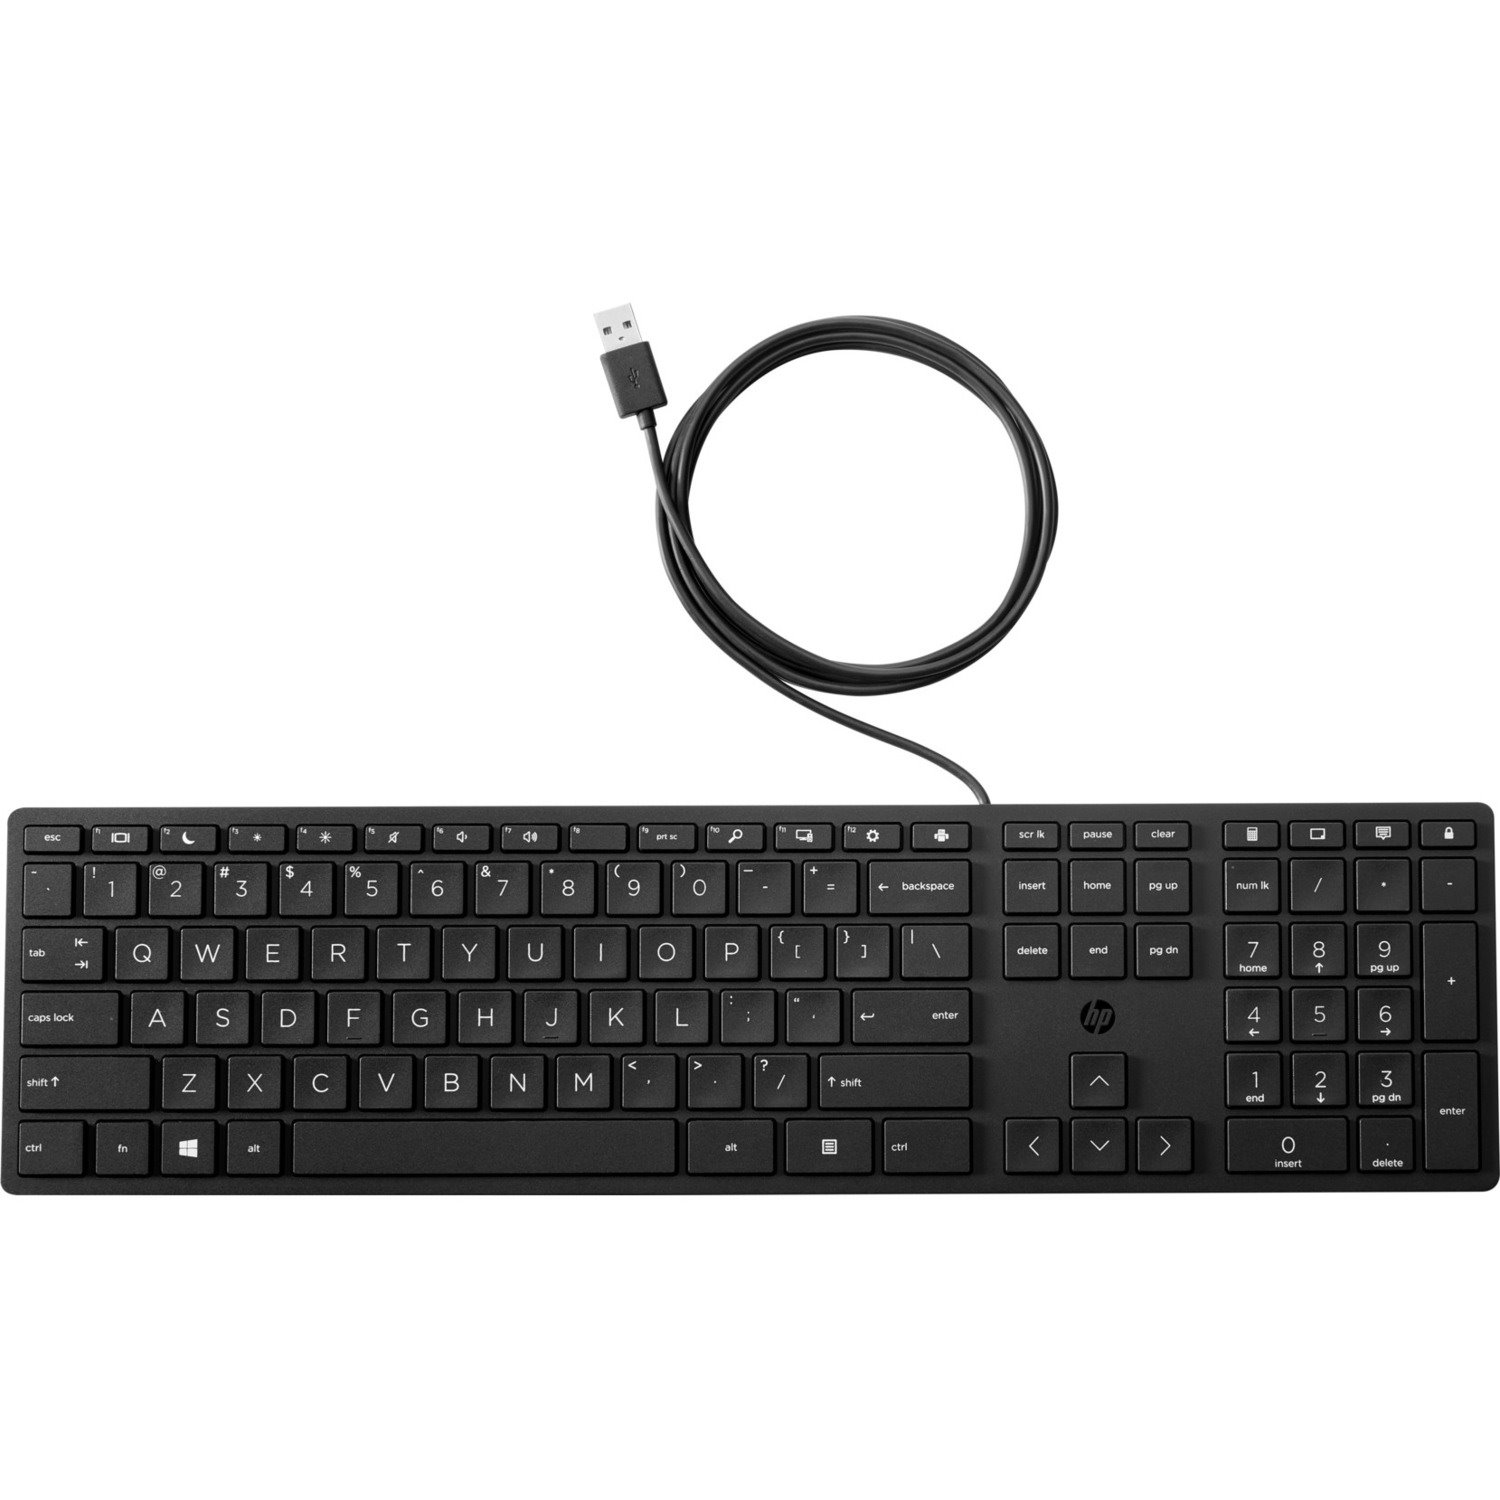 HP 320K Keyboard - Cable Connectivity - USB Interface